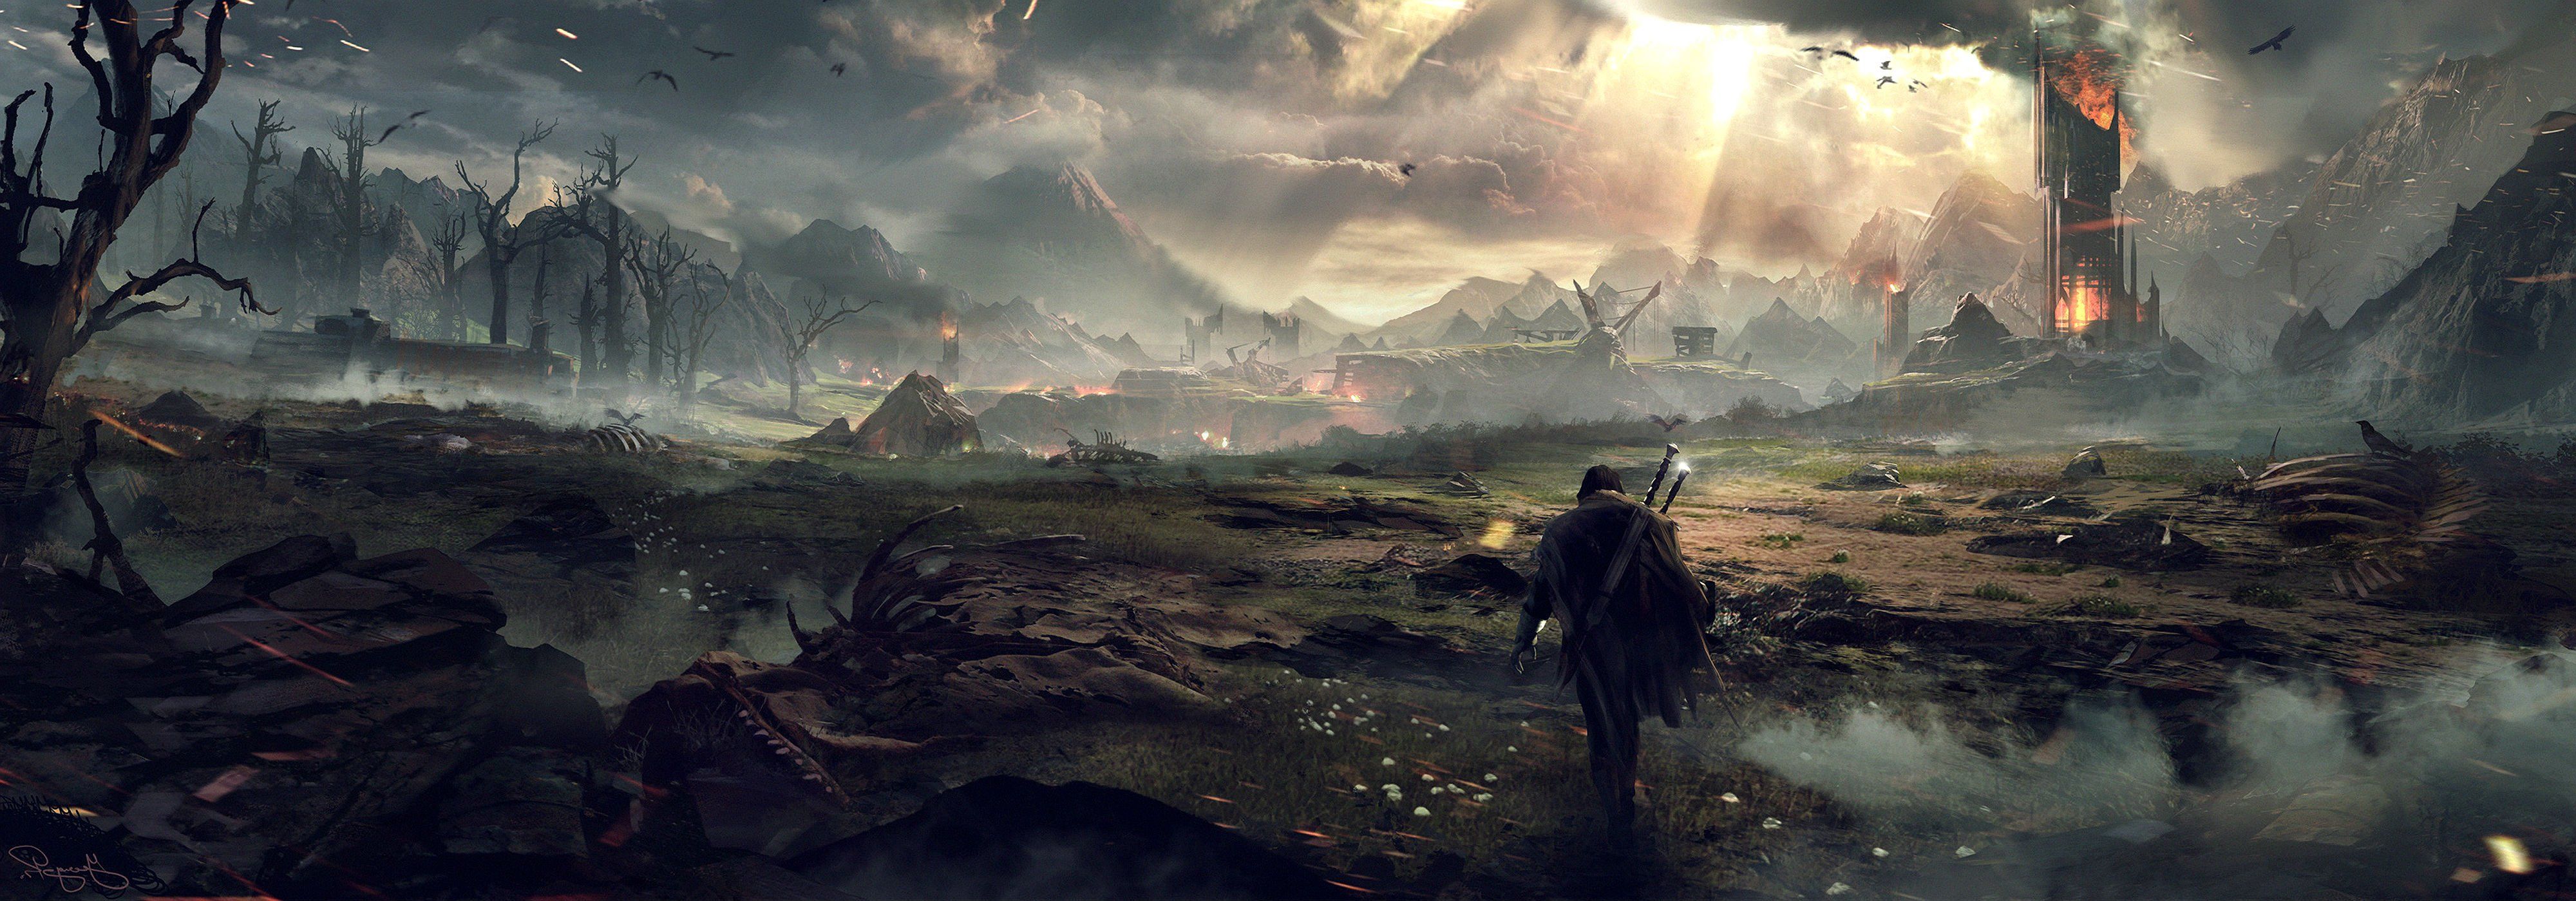 Dual Monitor Wallpaper Lord Of The Rings Wallpaper